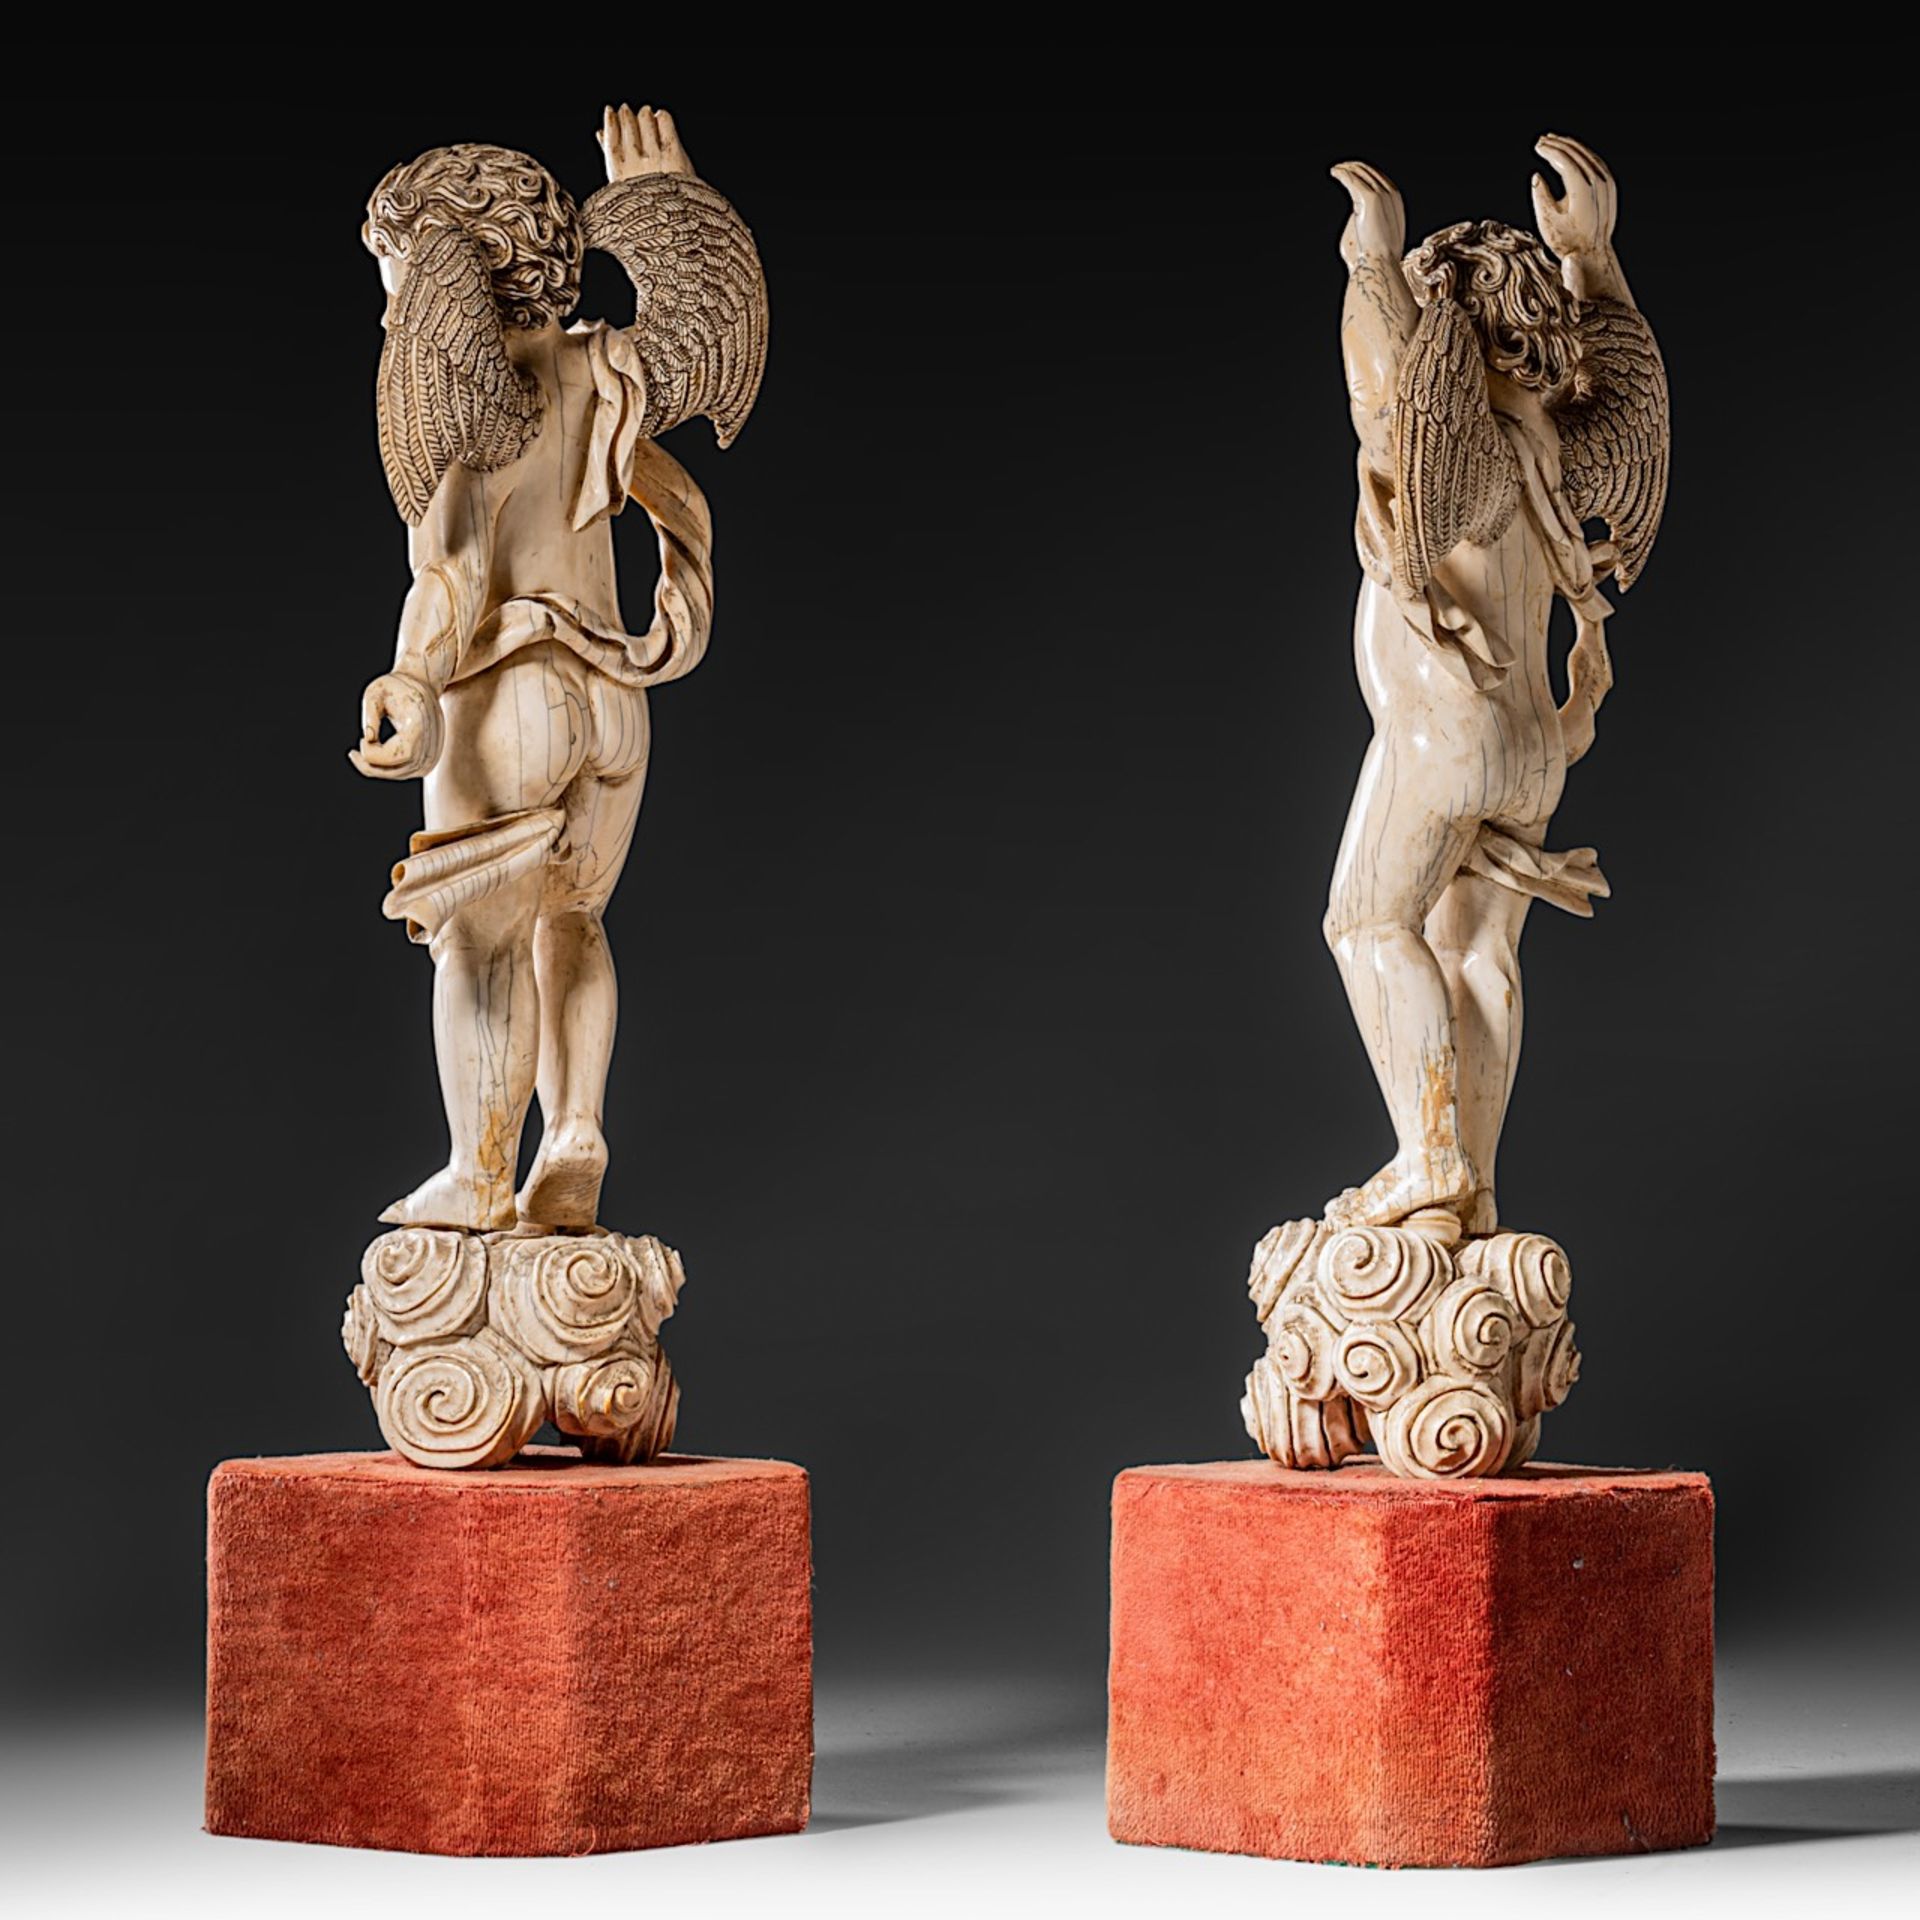 A pair of 17thC Indo-Portuguese ivory angels, H (figures) 38,5 cm - total H 49 cm / 2862 - 2968 g (+ - Image 4 of 7